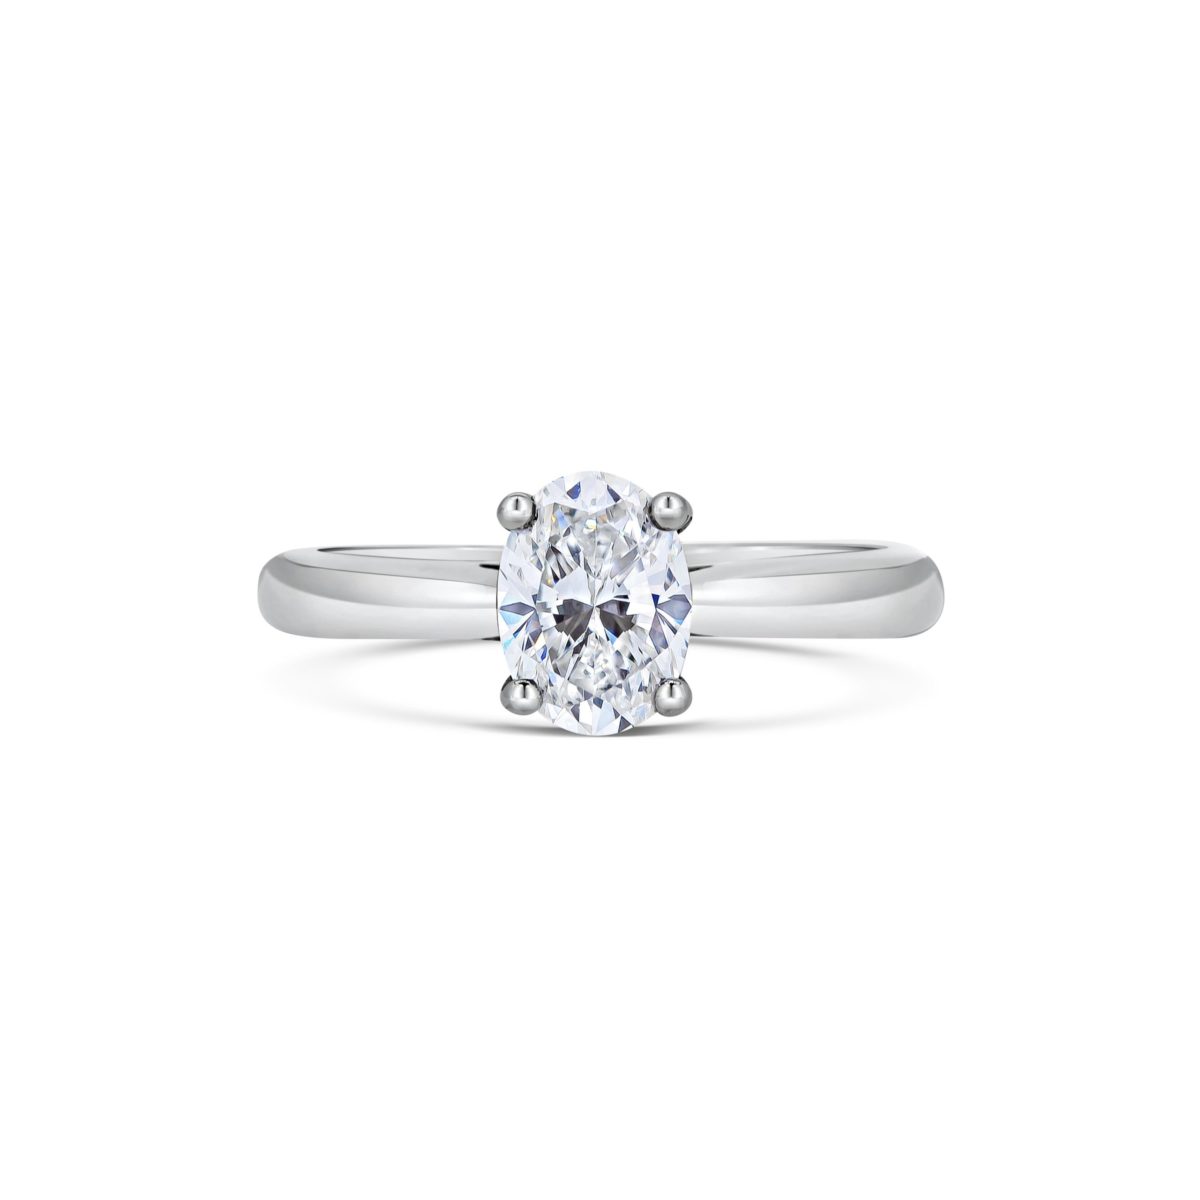 Anna Oval Cut Diamond Solitaire Engagement Ring